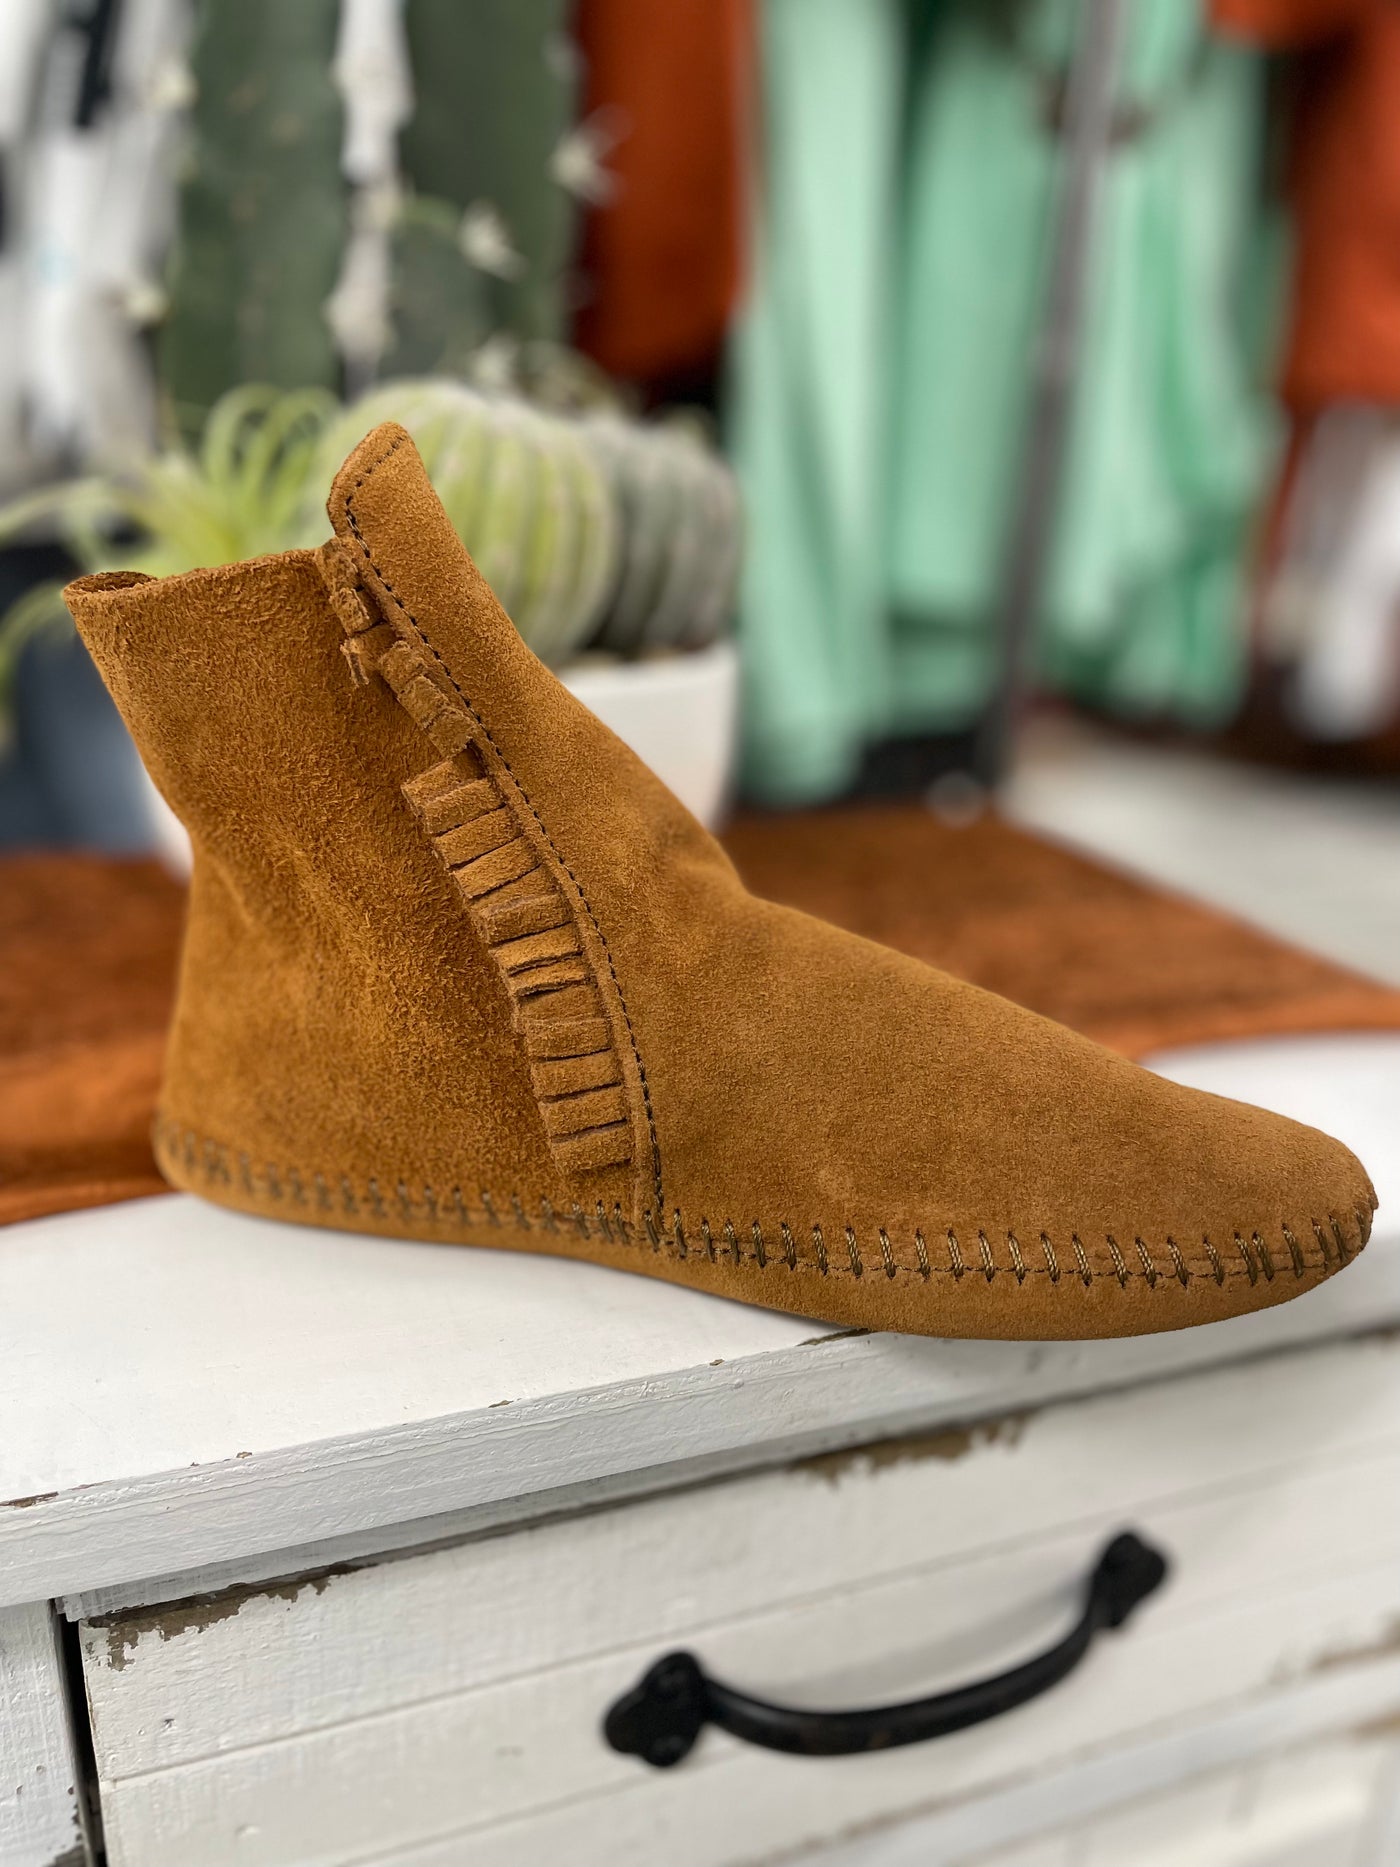 The Tessa Double Button Moccasin Bootie